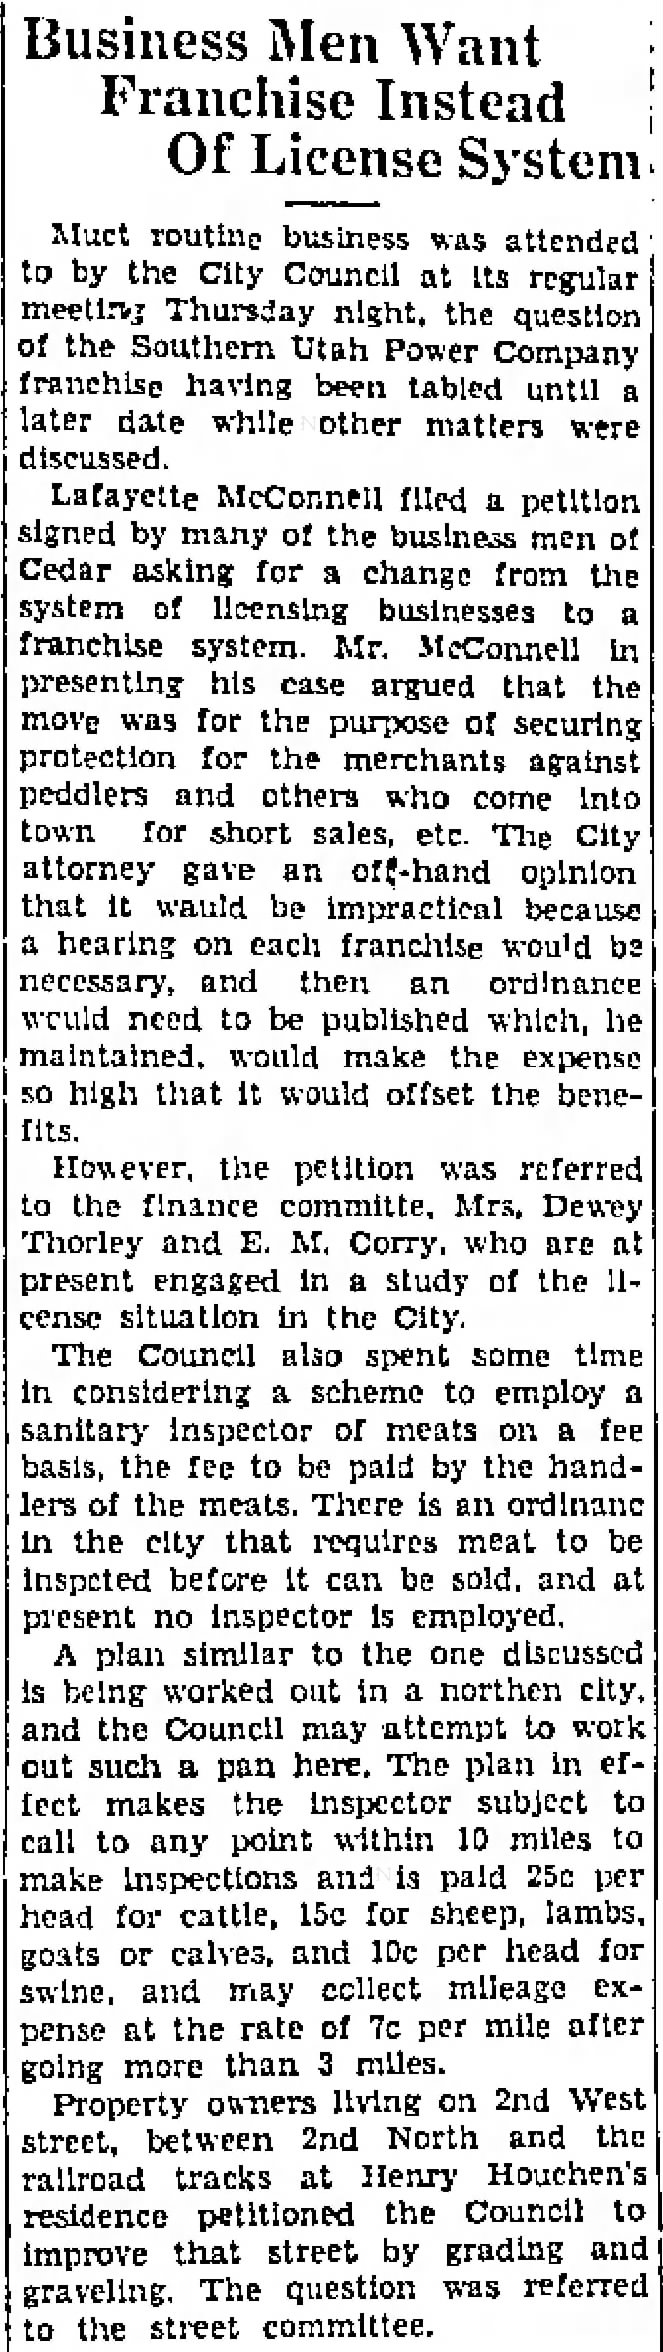 Lafayette McConnell - petition - Iron County Record 09 Feb 1933